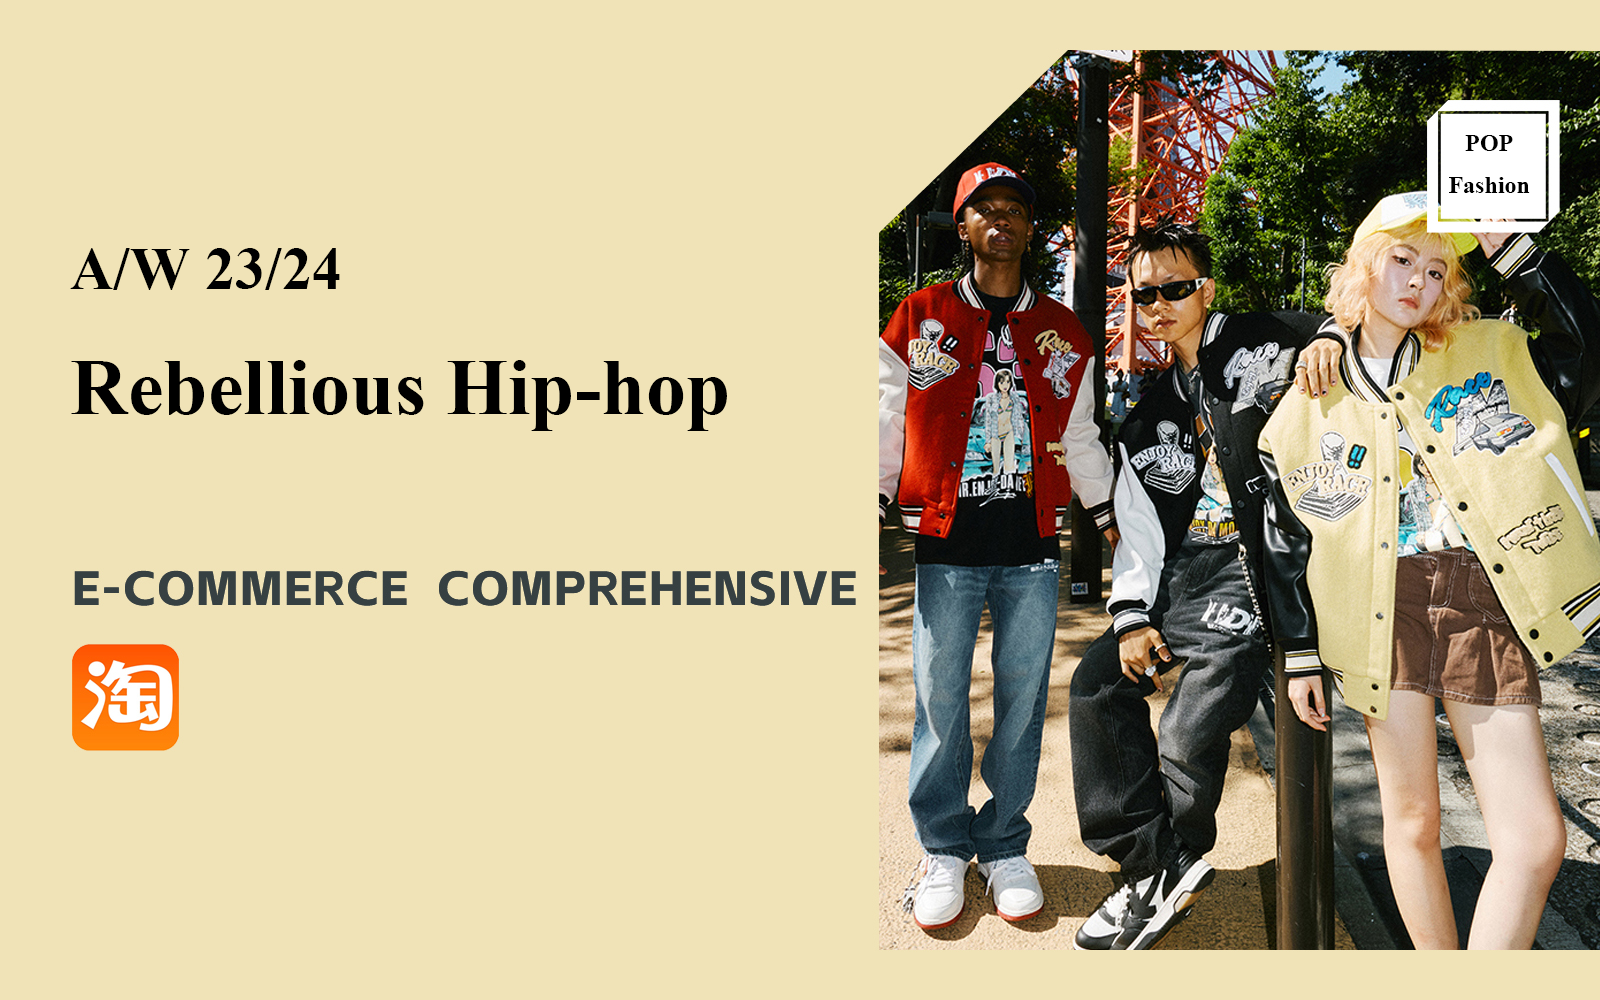 Rebellious Hip-hop -- The Comprehensive Analysis of Menswear E-commerce Brand